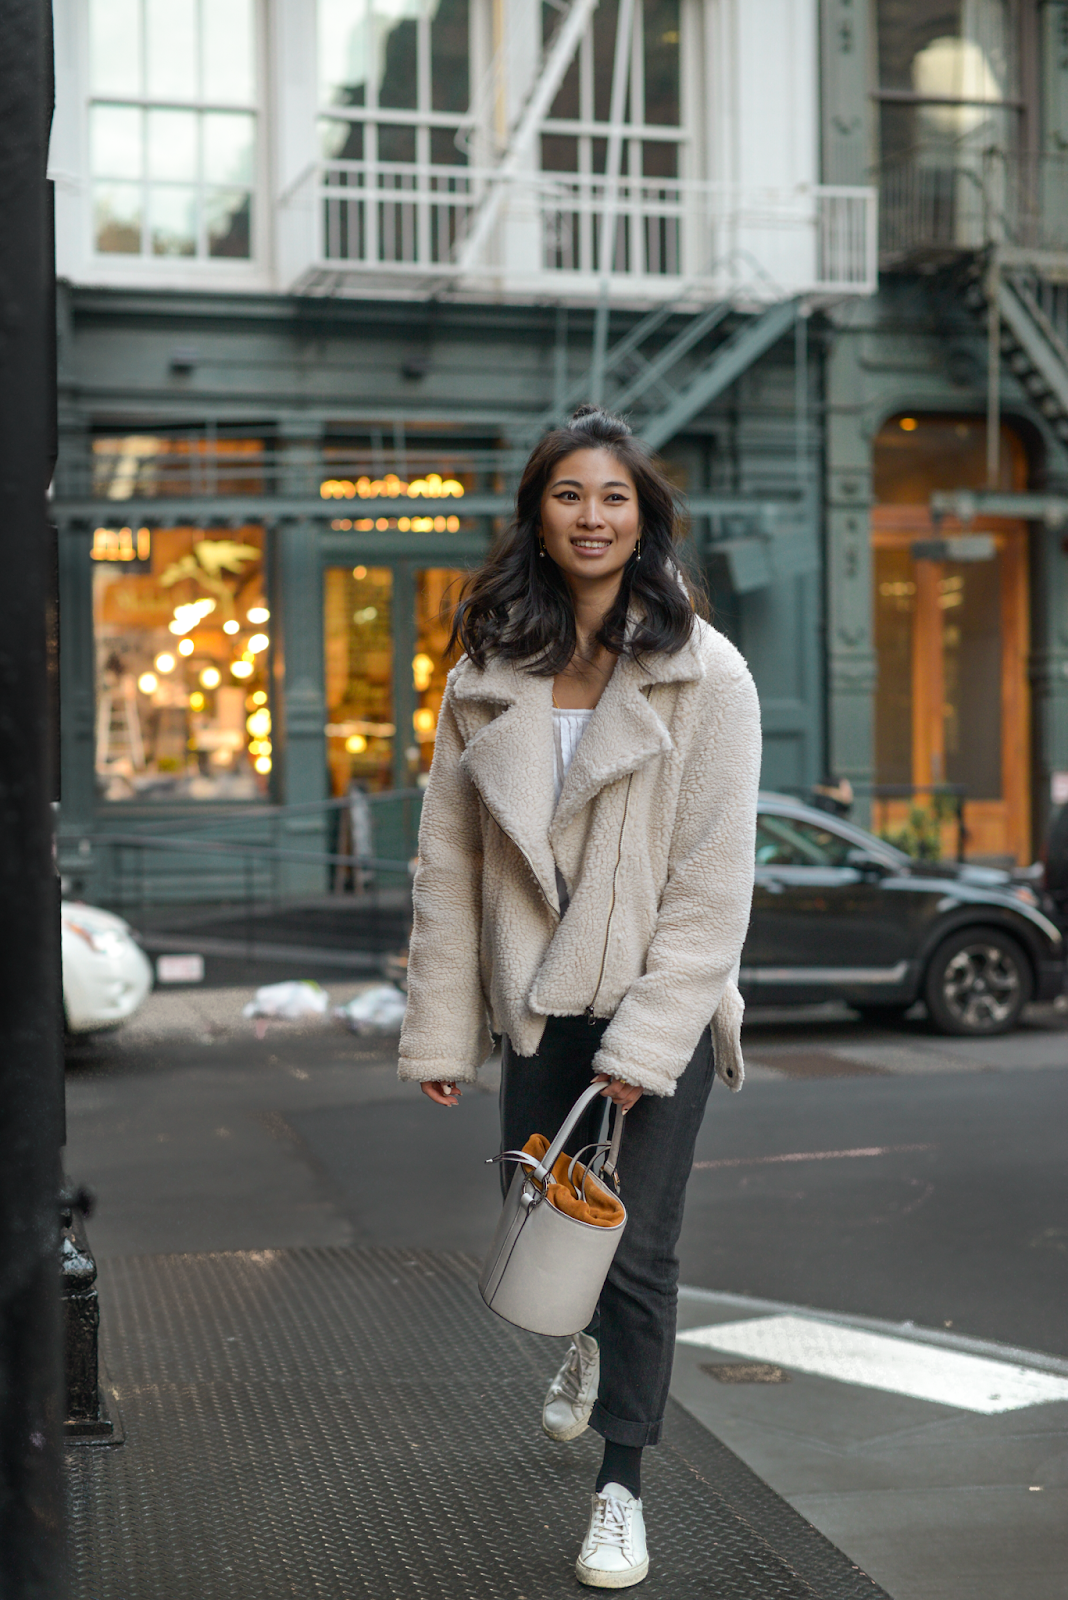 New York winter style, shearling jacket, white bucket bag, simple outfit for exploring NYC streets, NYC street style, Soho fashion, FOREVERVANNY Style, Tokyo and New York Fashion Blogger, Van Le Fashion Blog - December Again / 122018